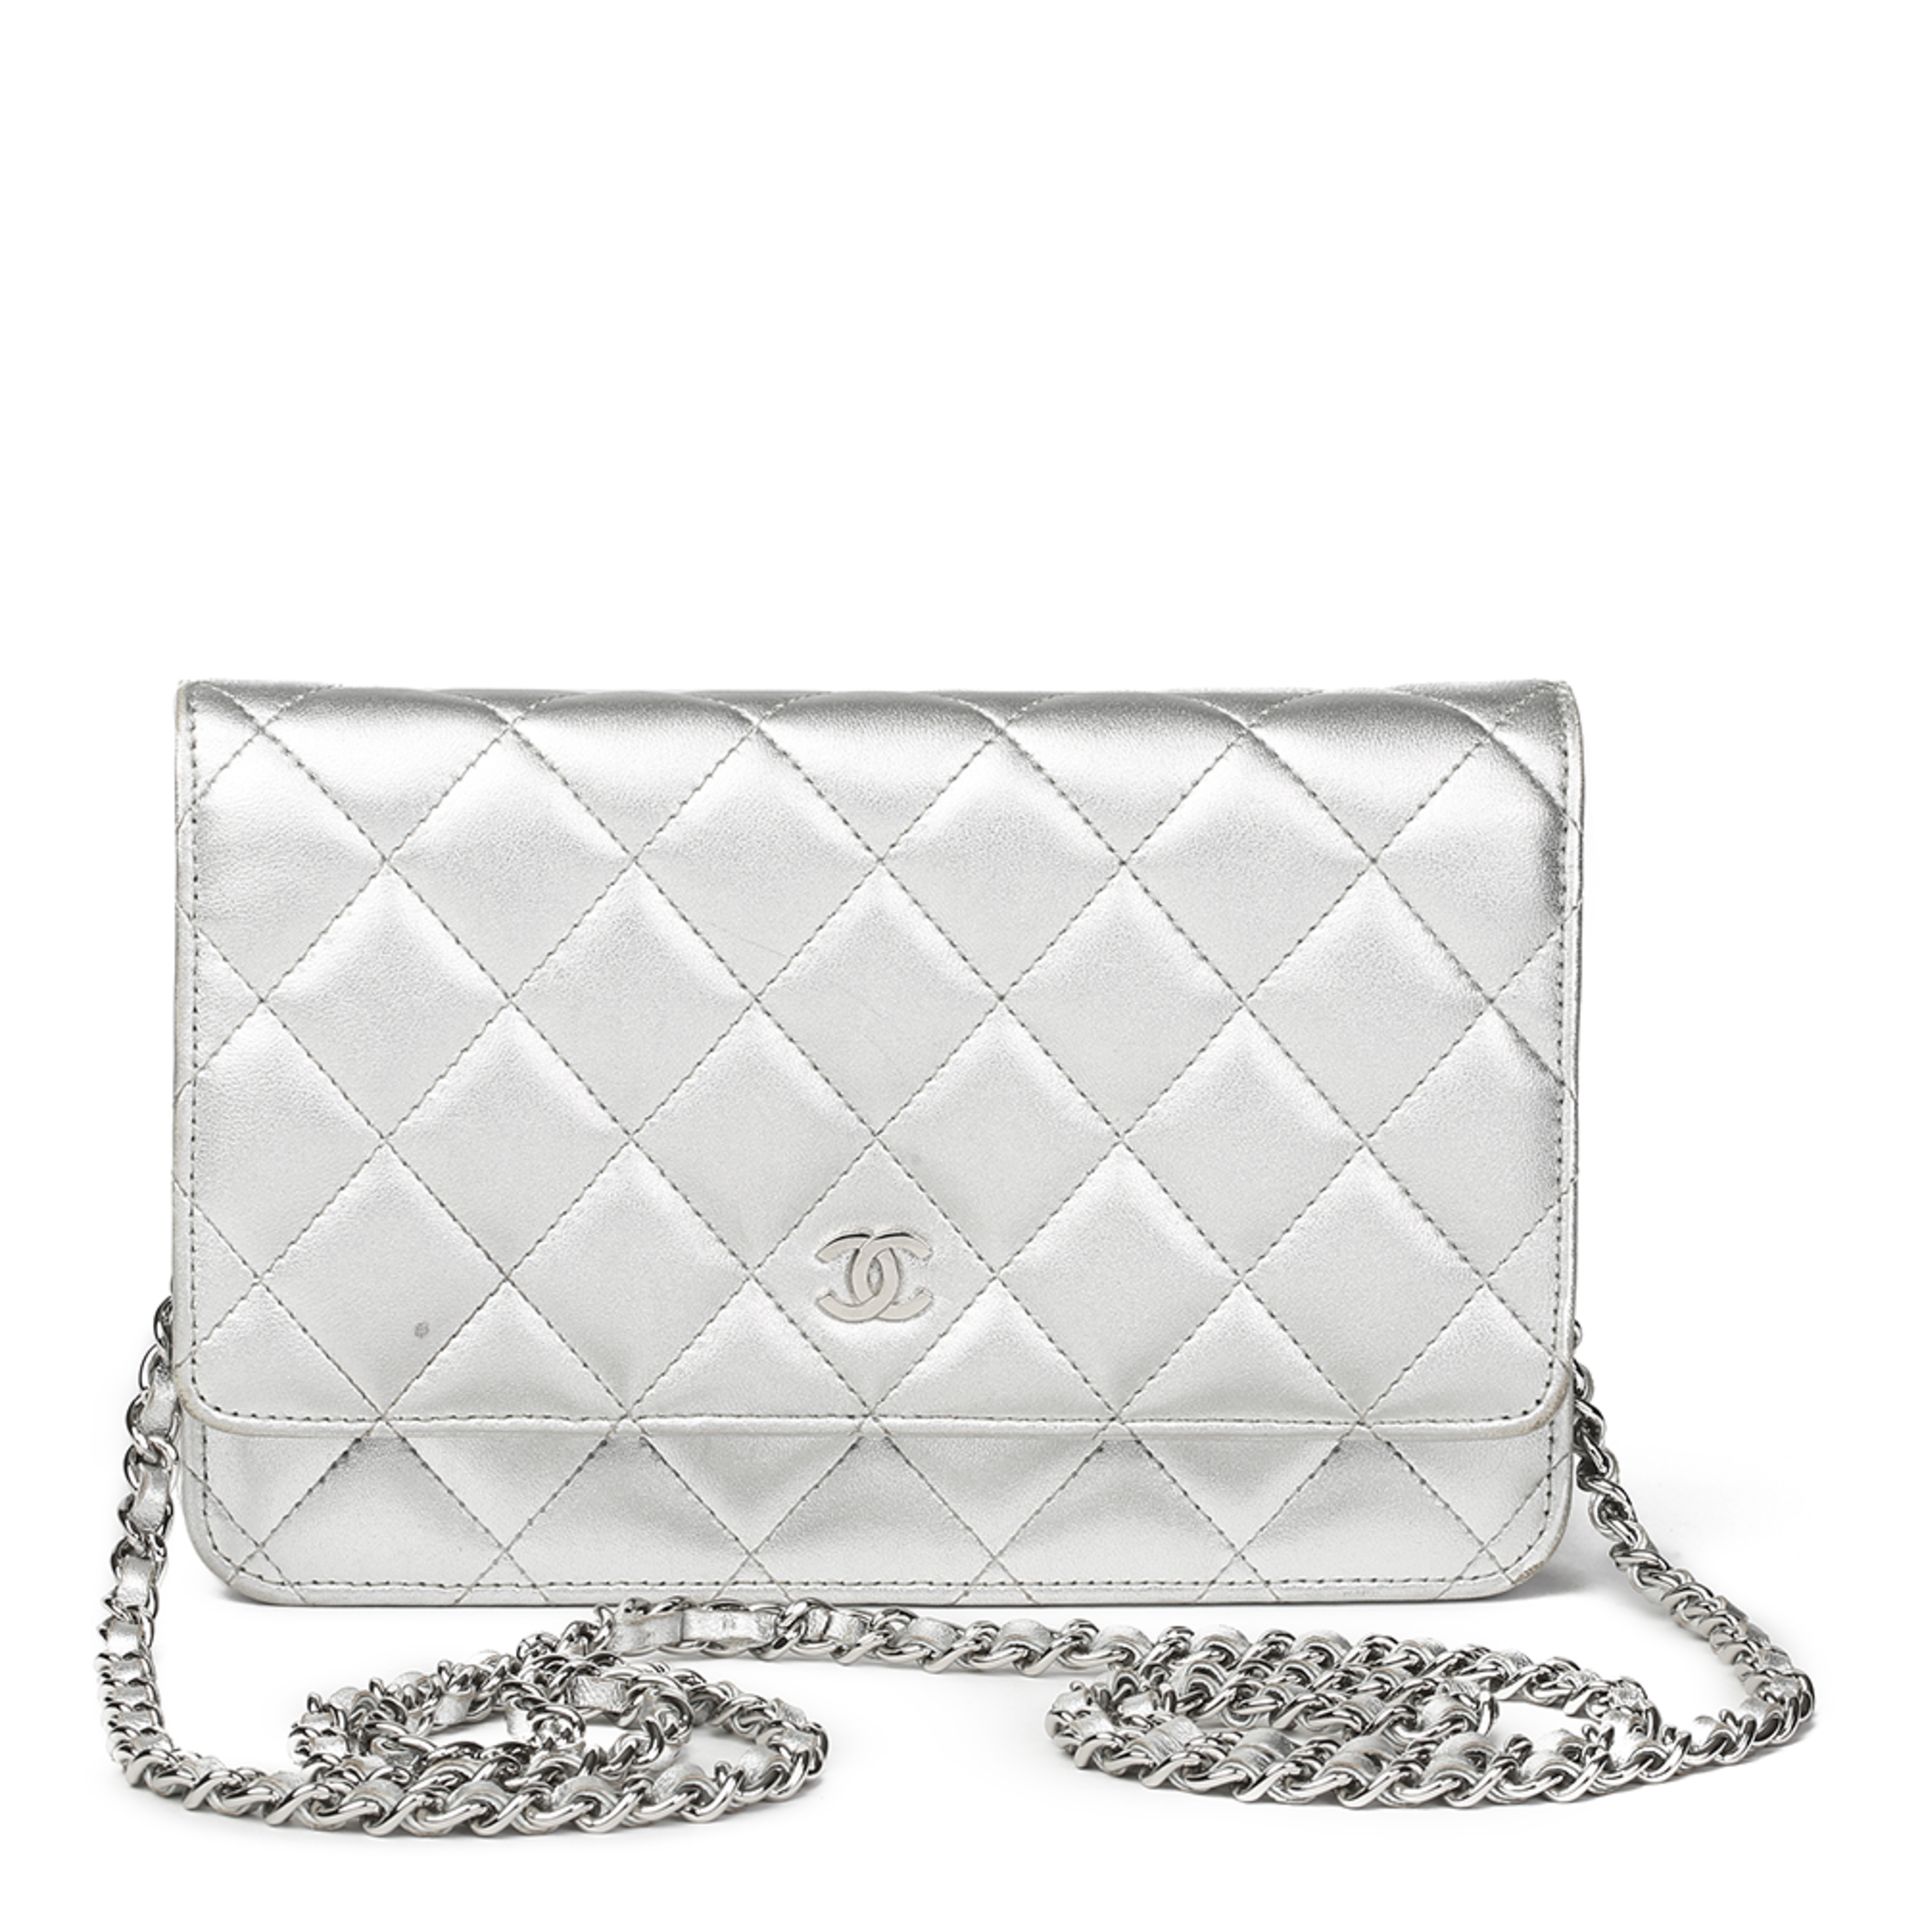 Chanel Silver Quilted Metallic Lambskin Wallet-On-Chain WOC